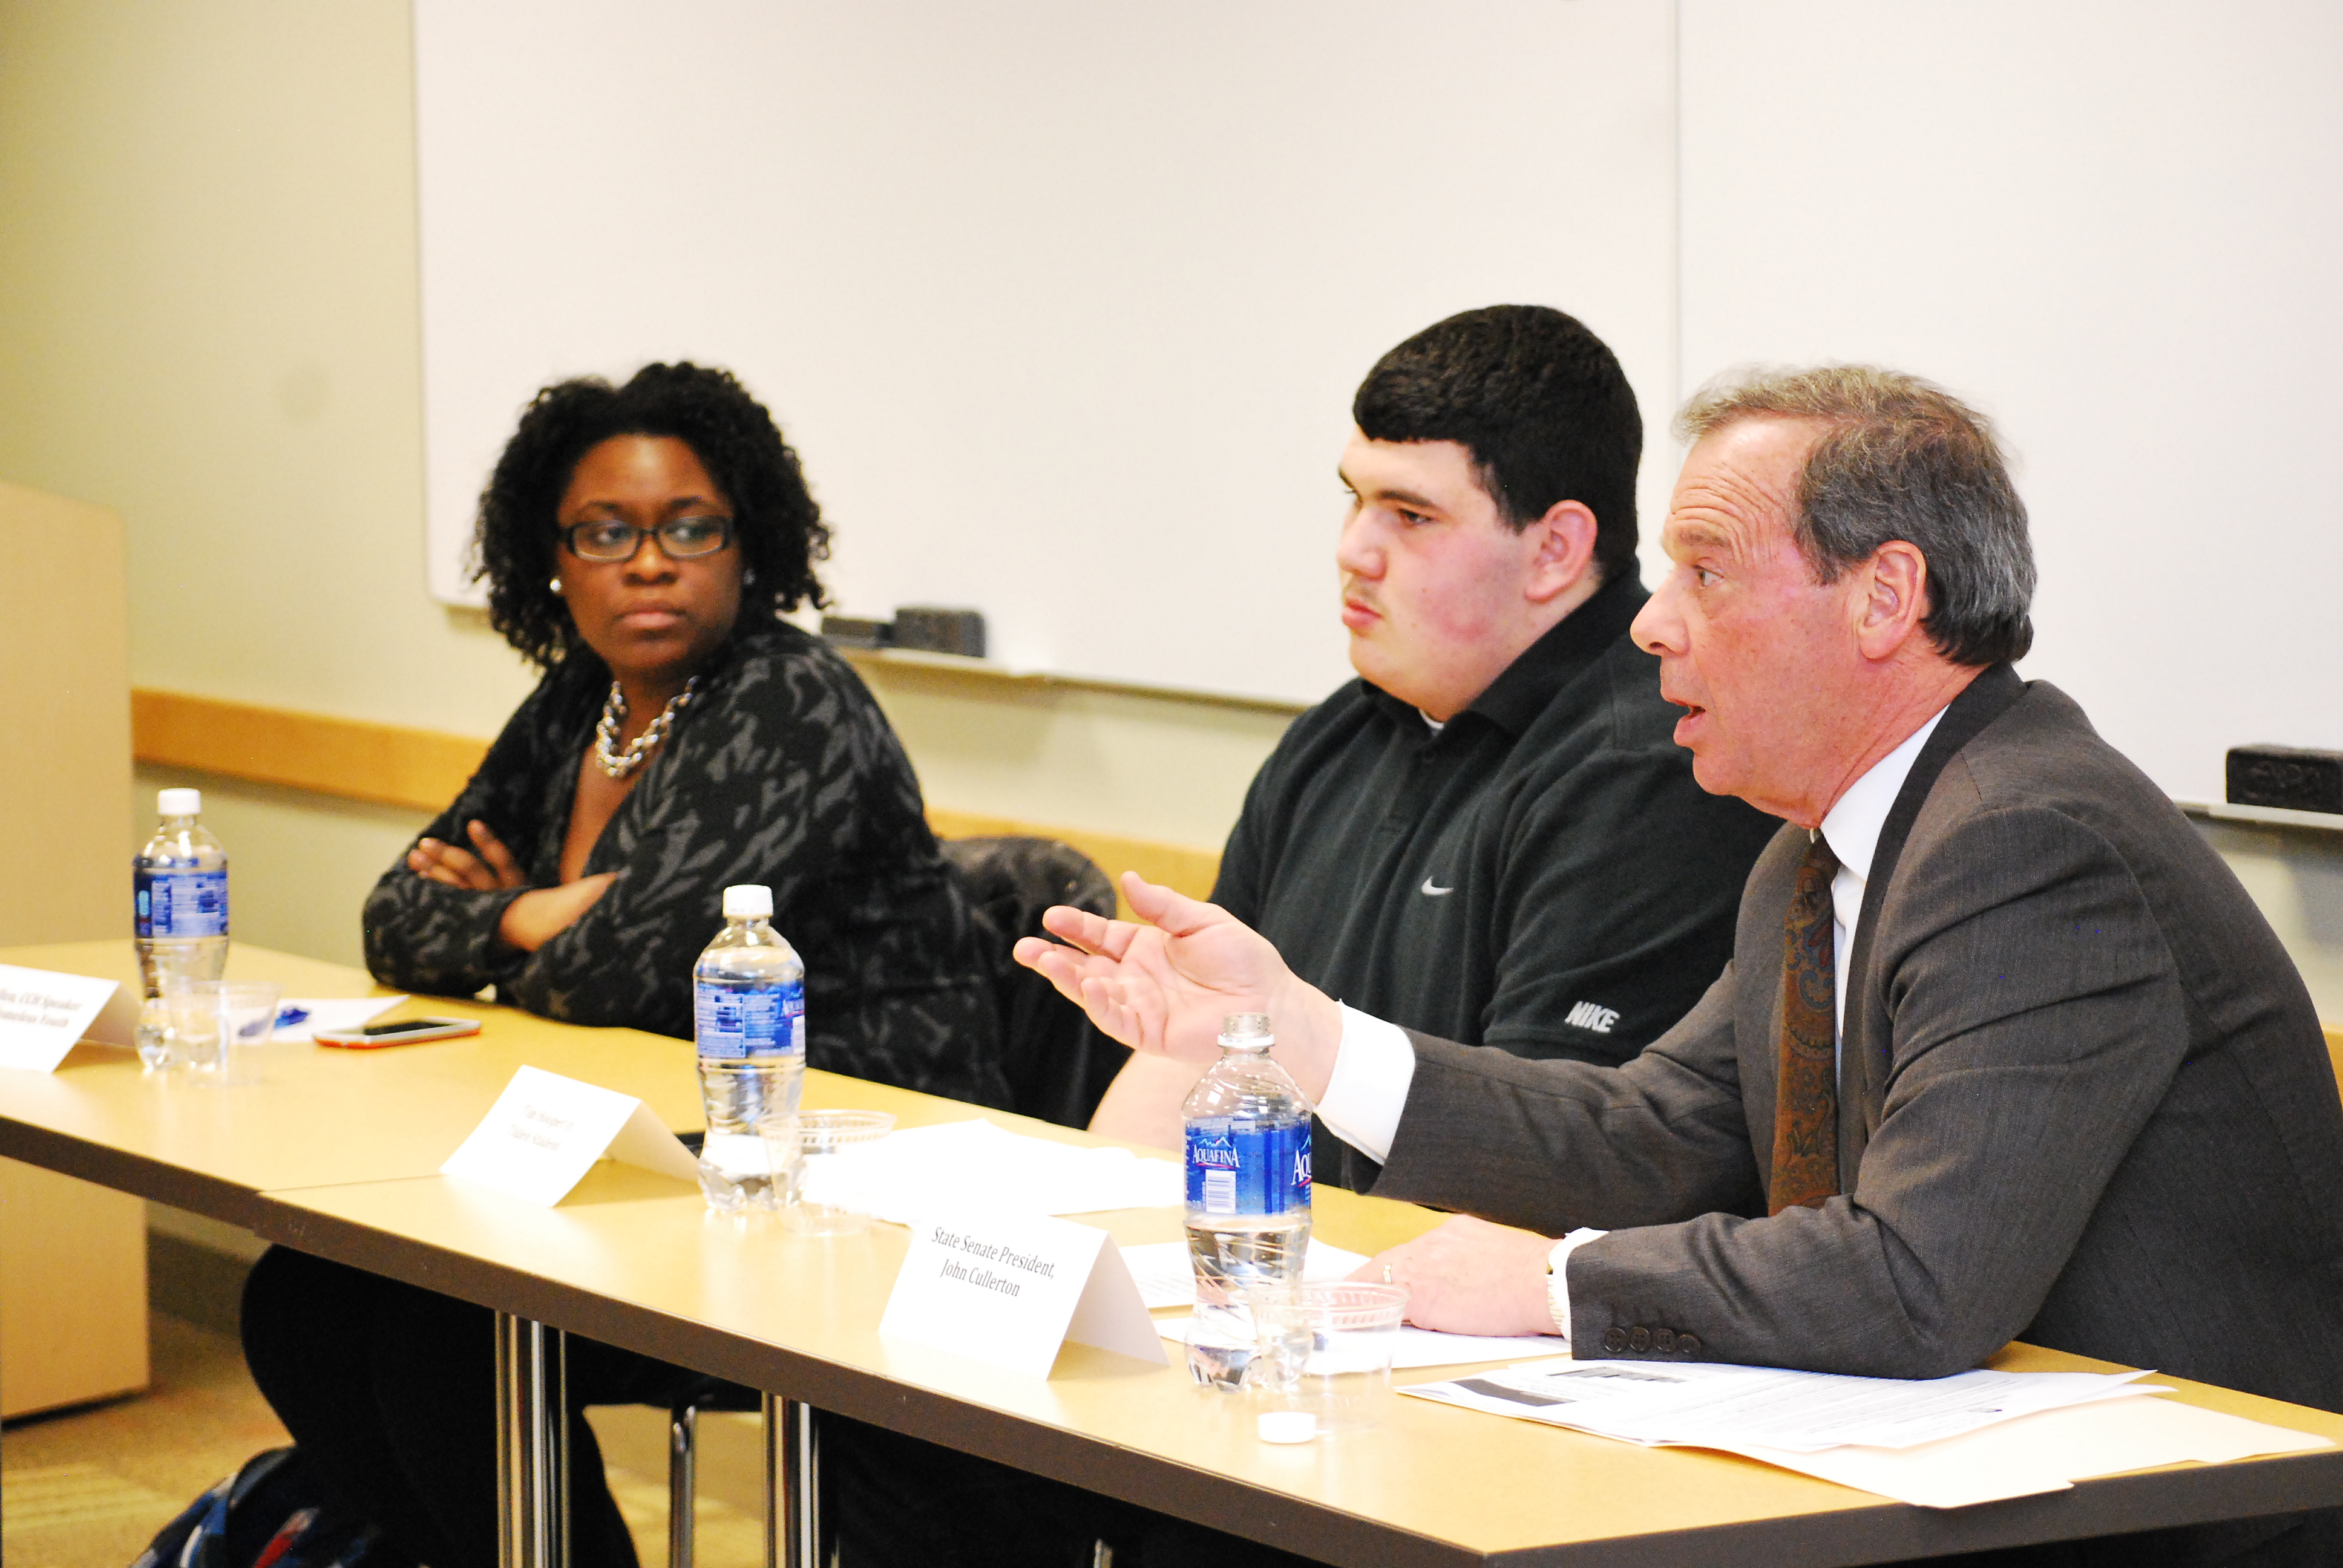 Senate President Cullerton Joins Cch Depaul Panel To Discuss